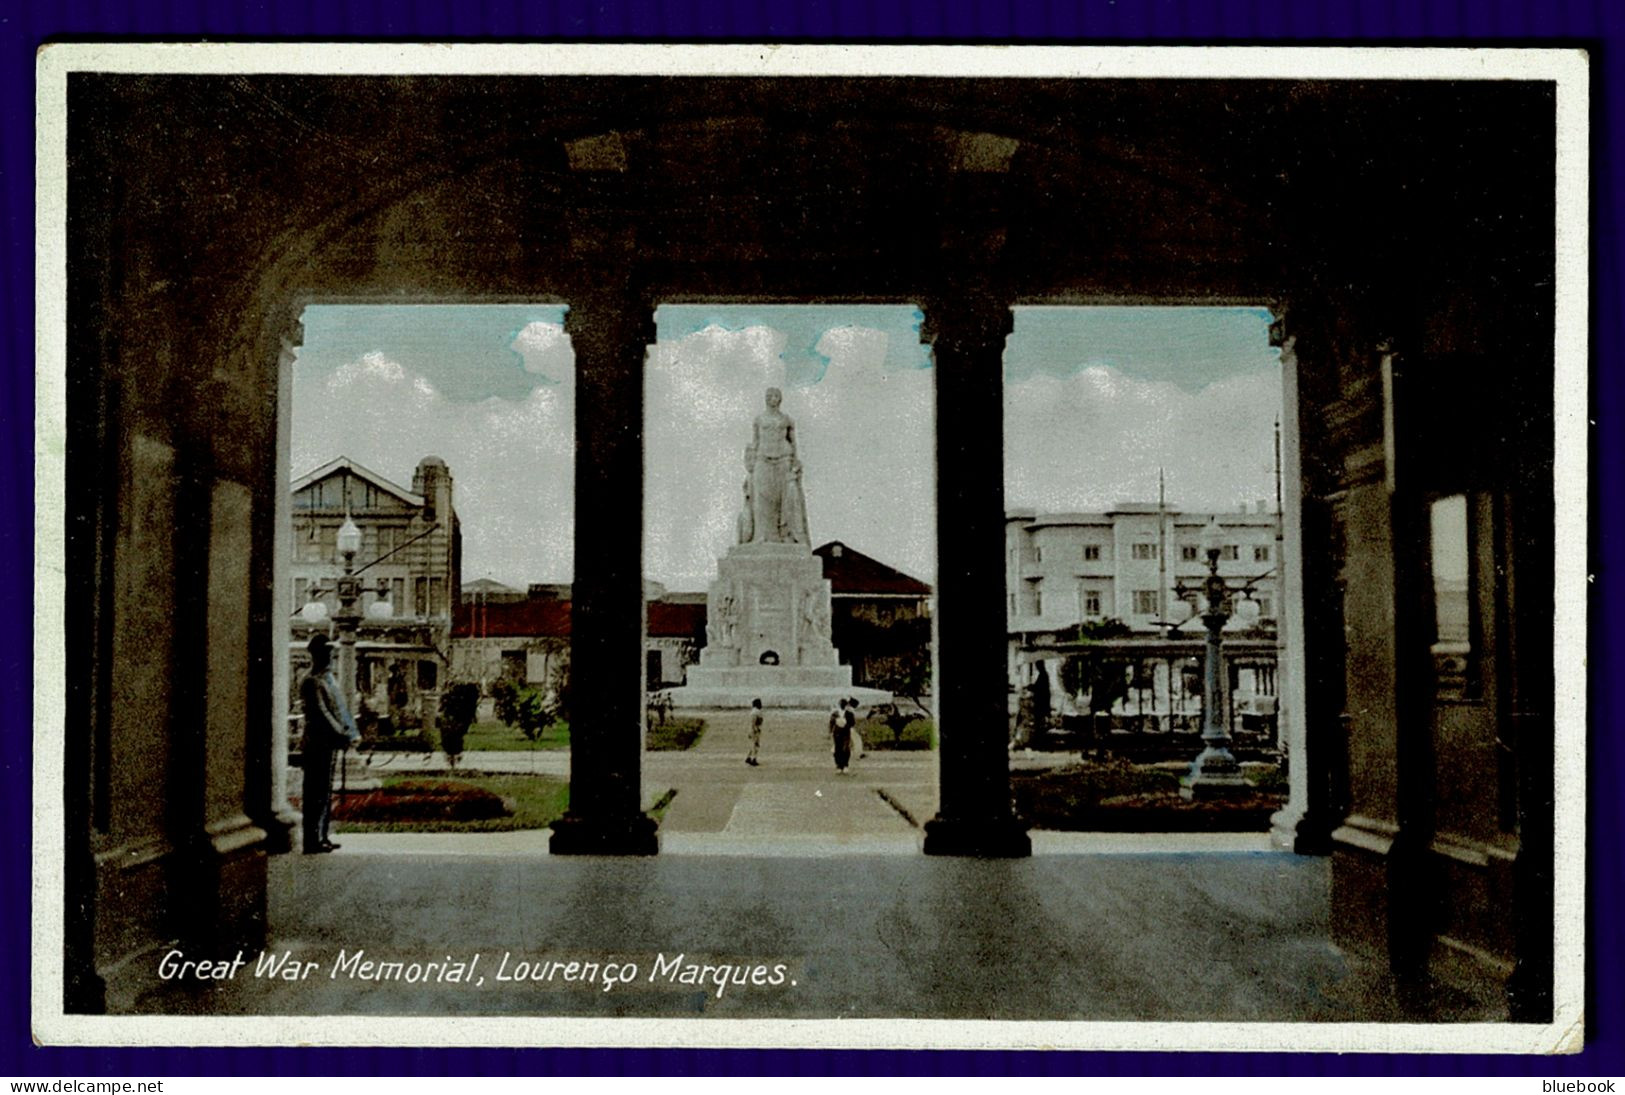 Ref 1639 - Early Postcard - Great War Memorial Laurenco Marques - Mozambique Africa - Mozambique